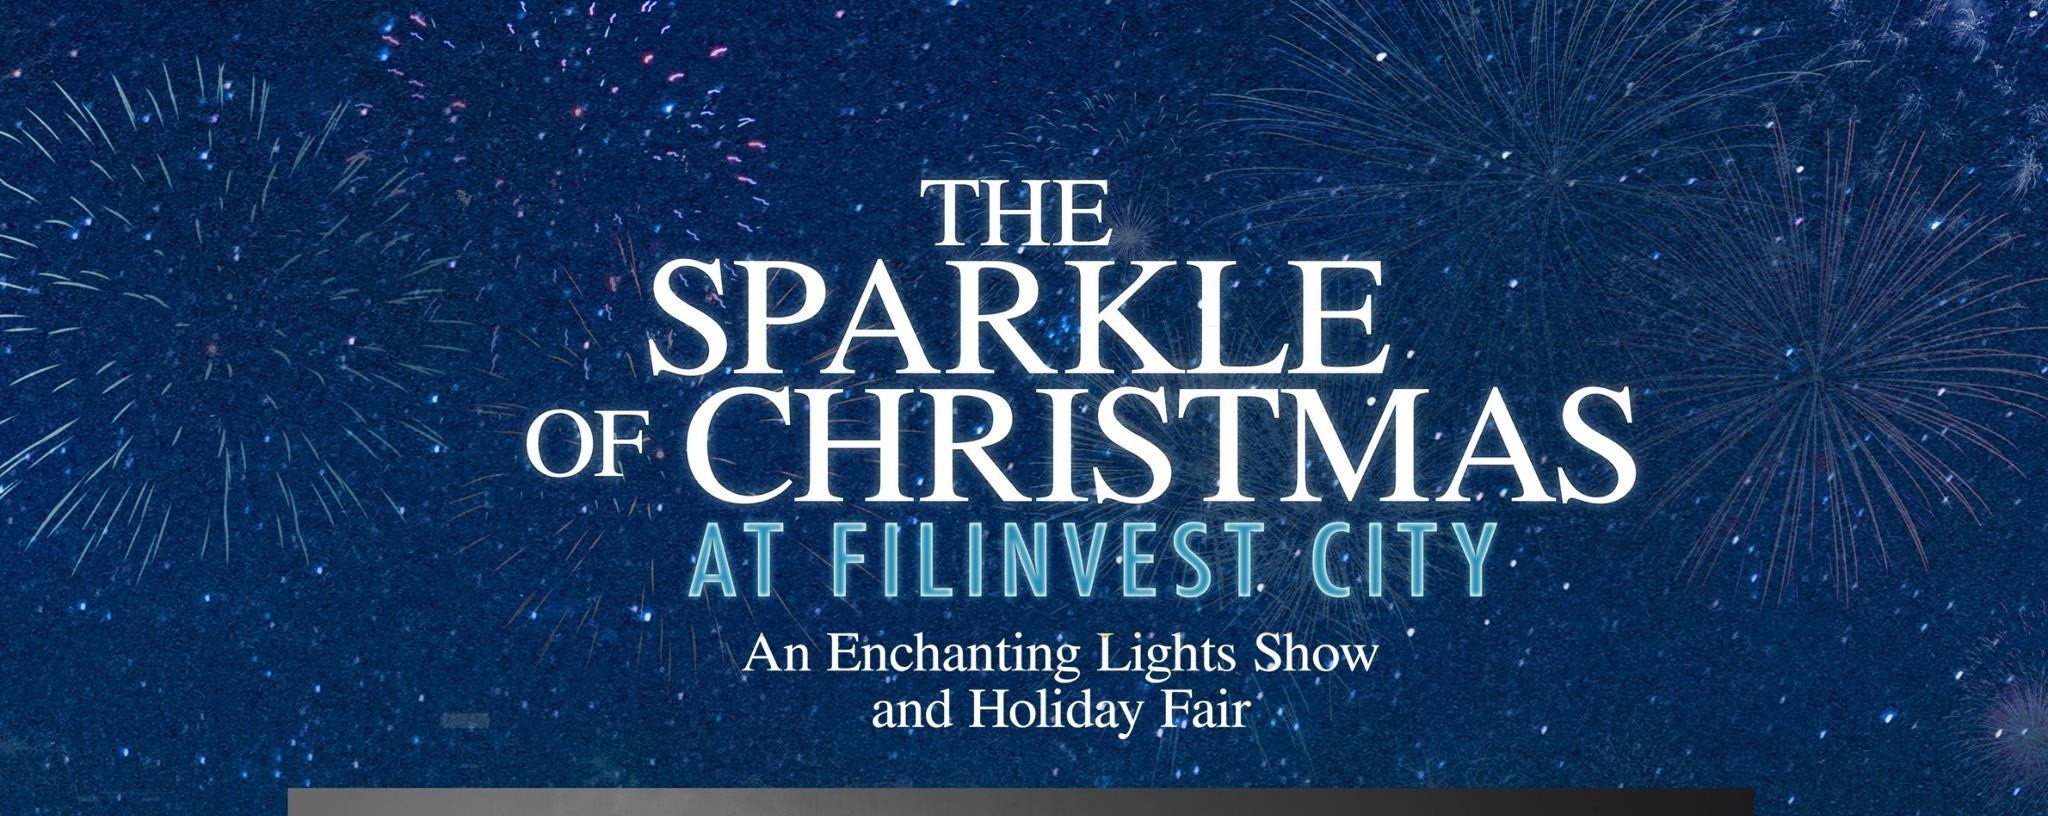 The Sparkle of Christmas at Filinvest City